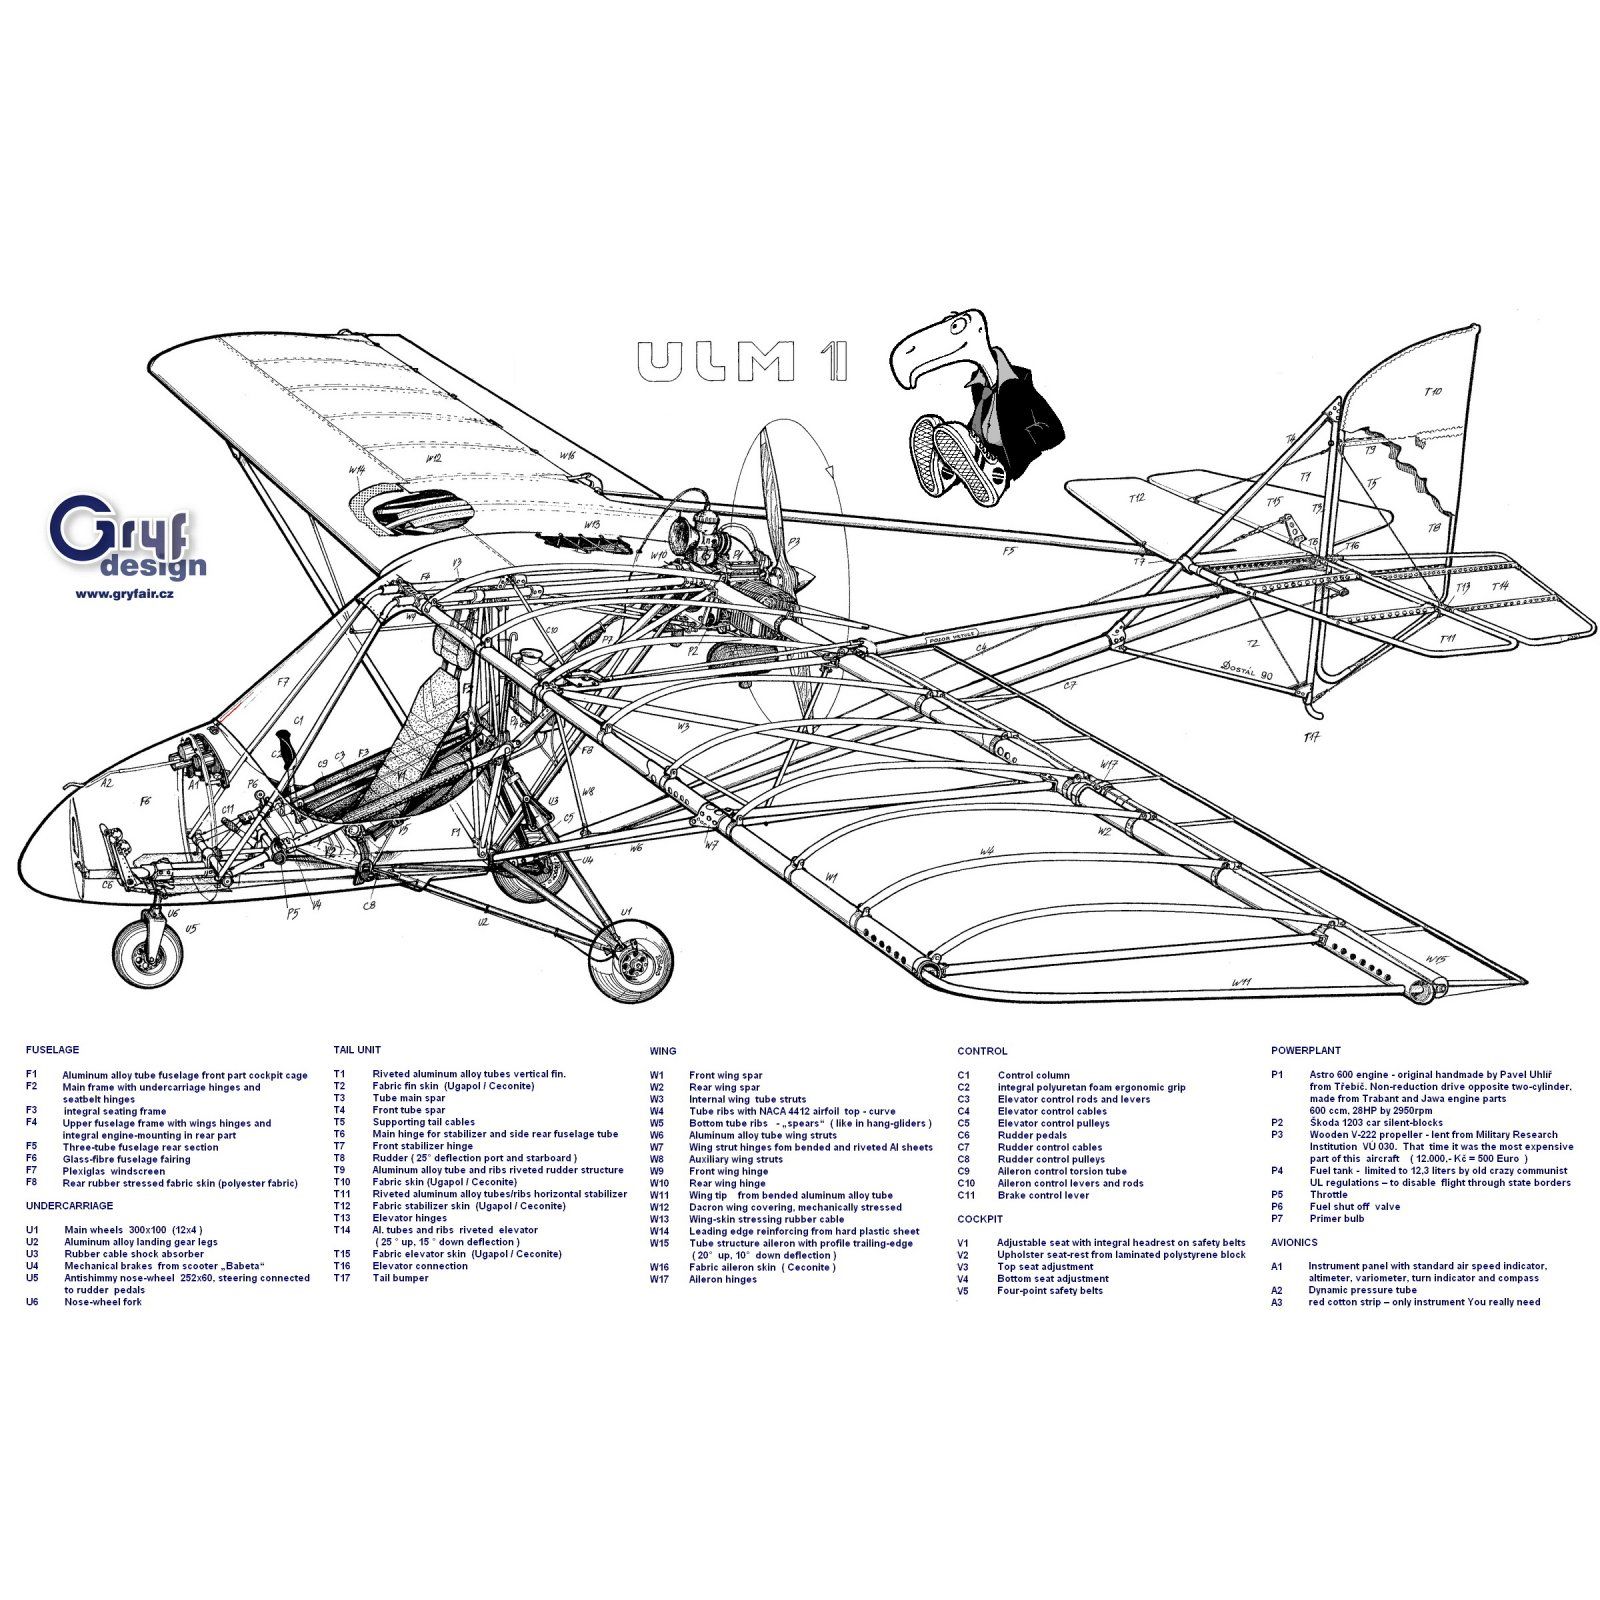 GRYF-ULM-1-PLANS-AND-INFORMATION-SET-FOR-HOMEBUILD-AIRCRAFT-6.jpg